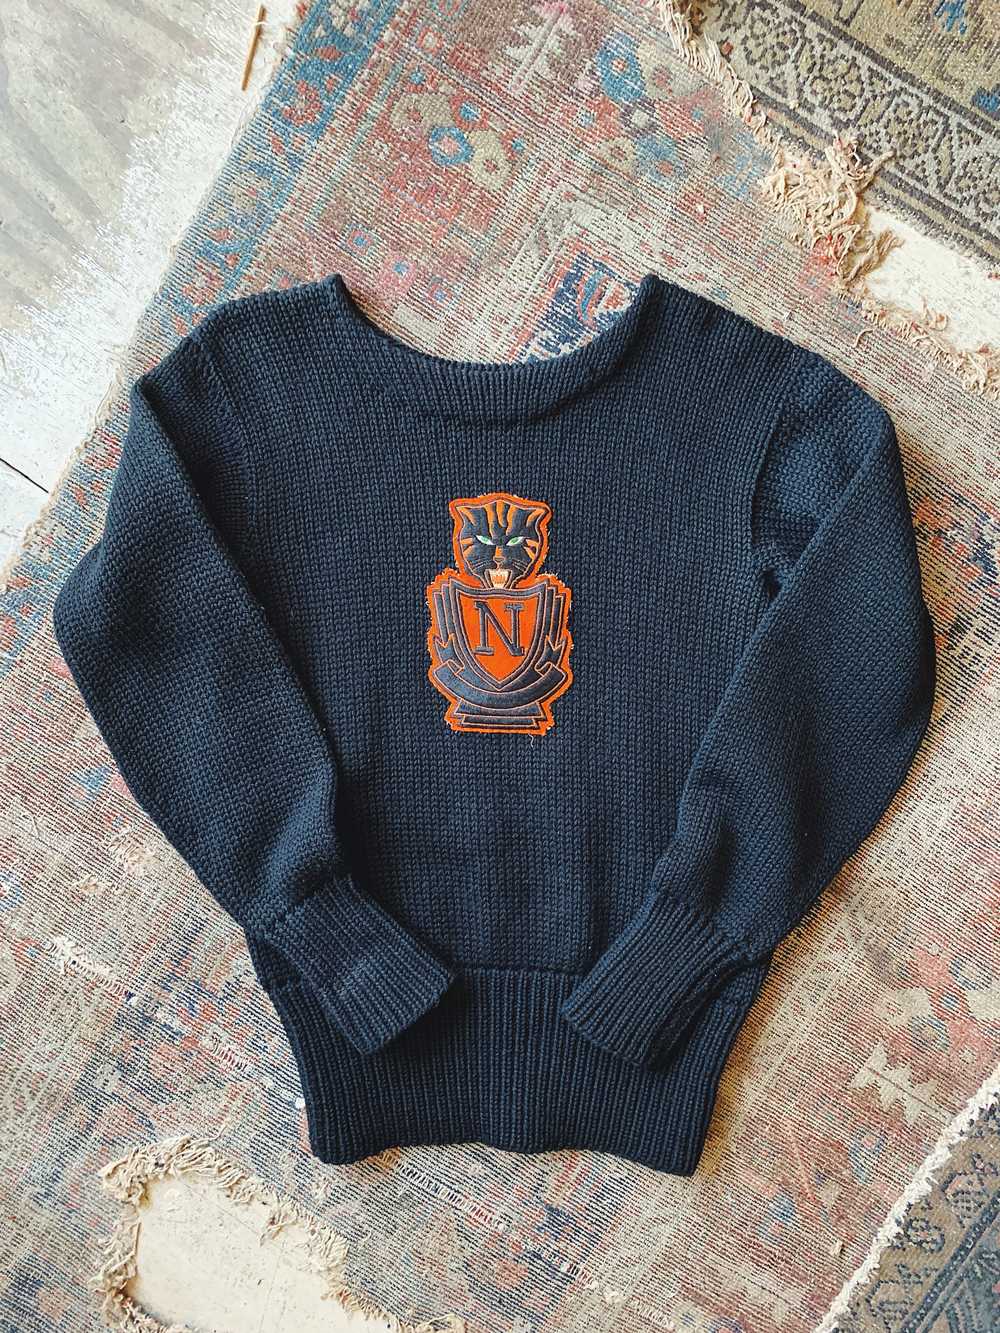 Vintage Indian Brand Varsity Sweater - Size Small - image 1